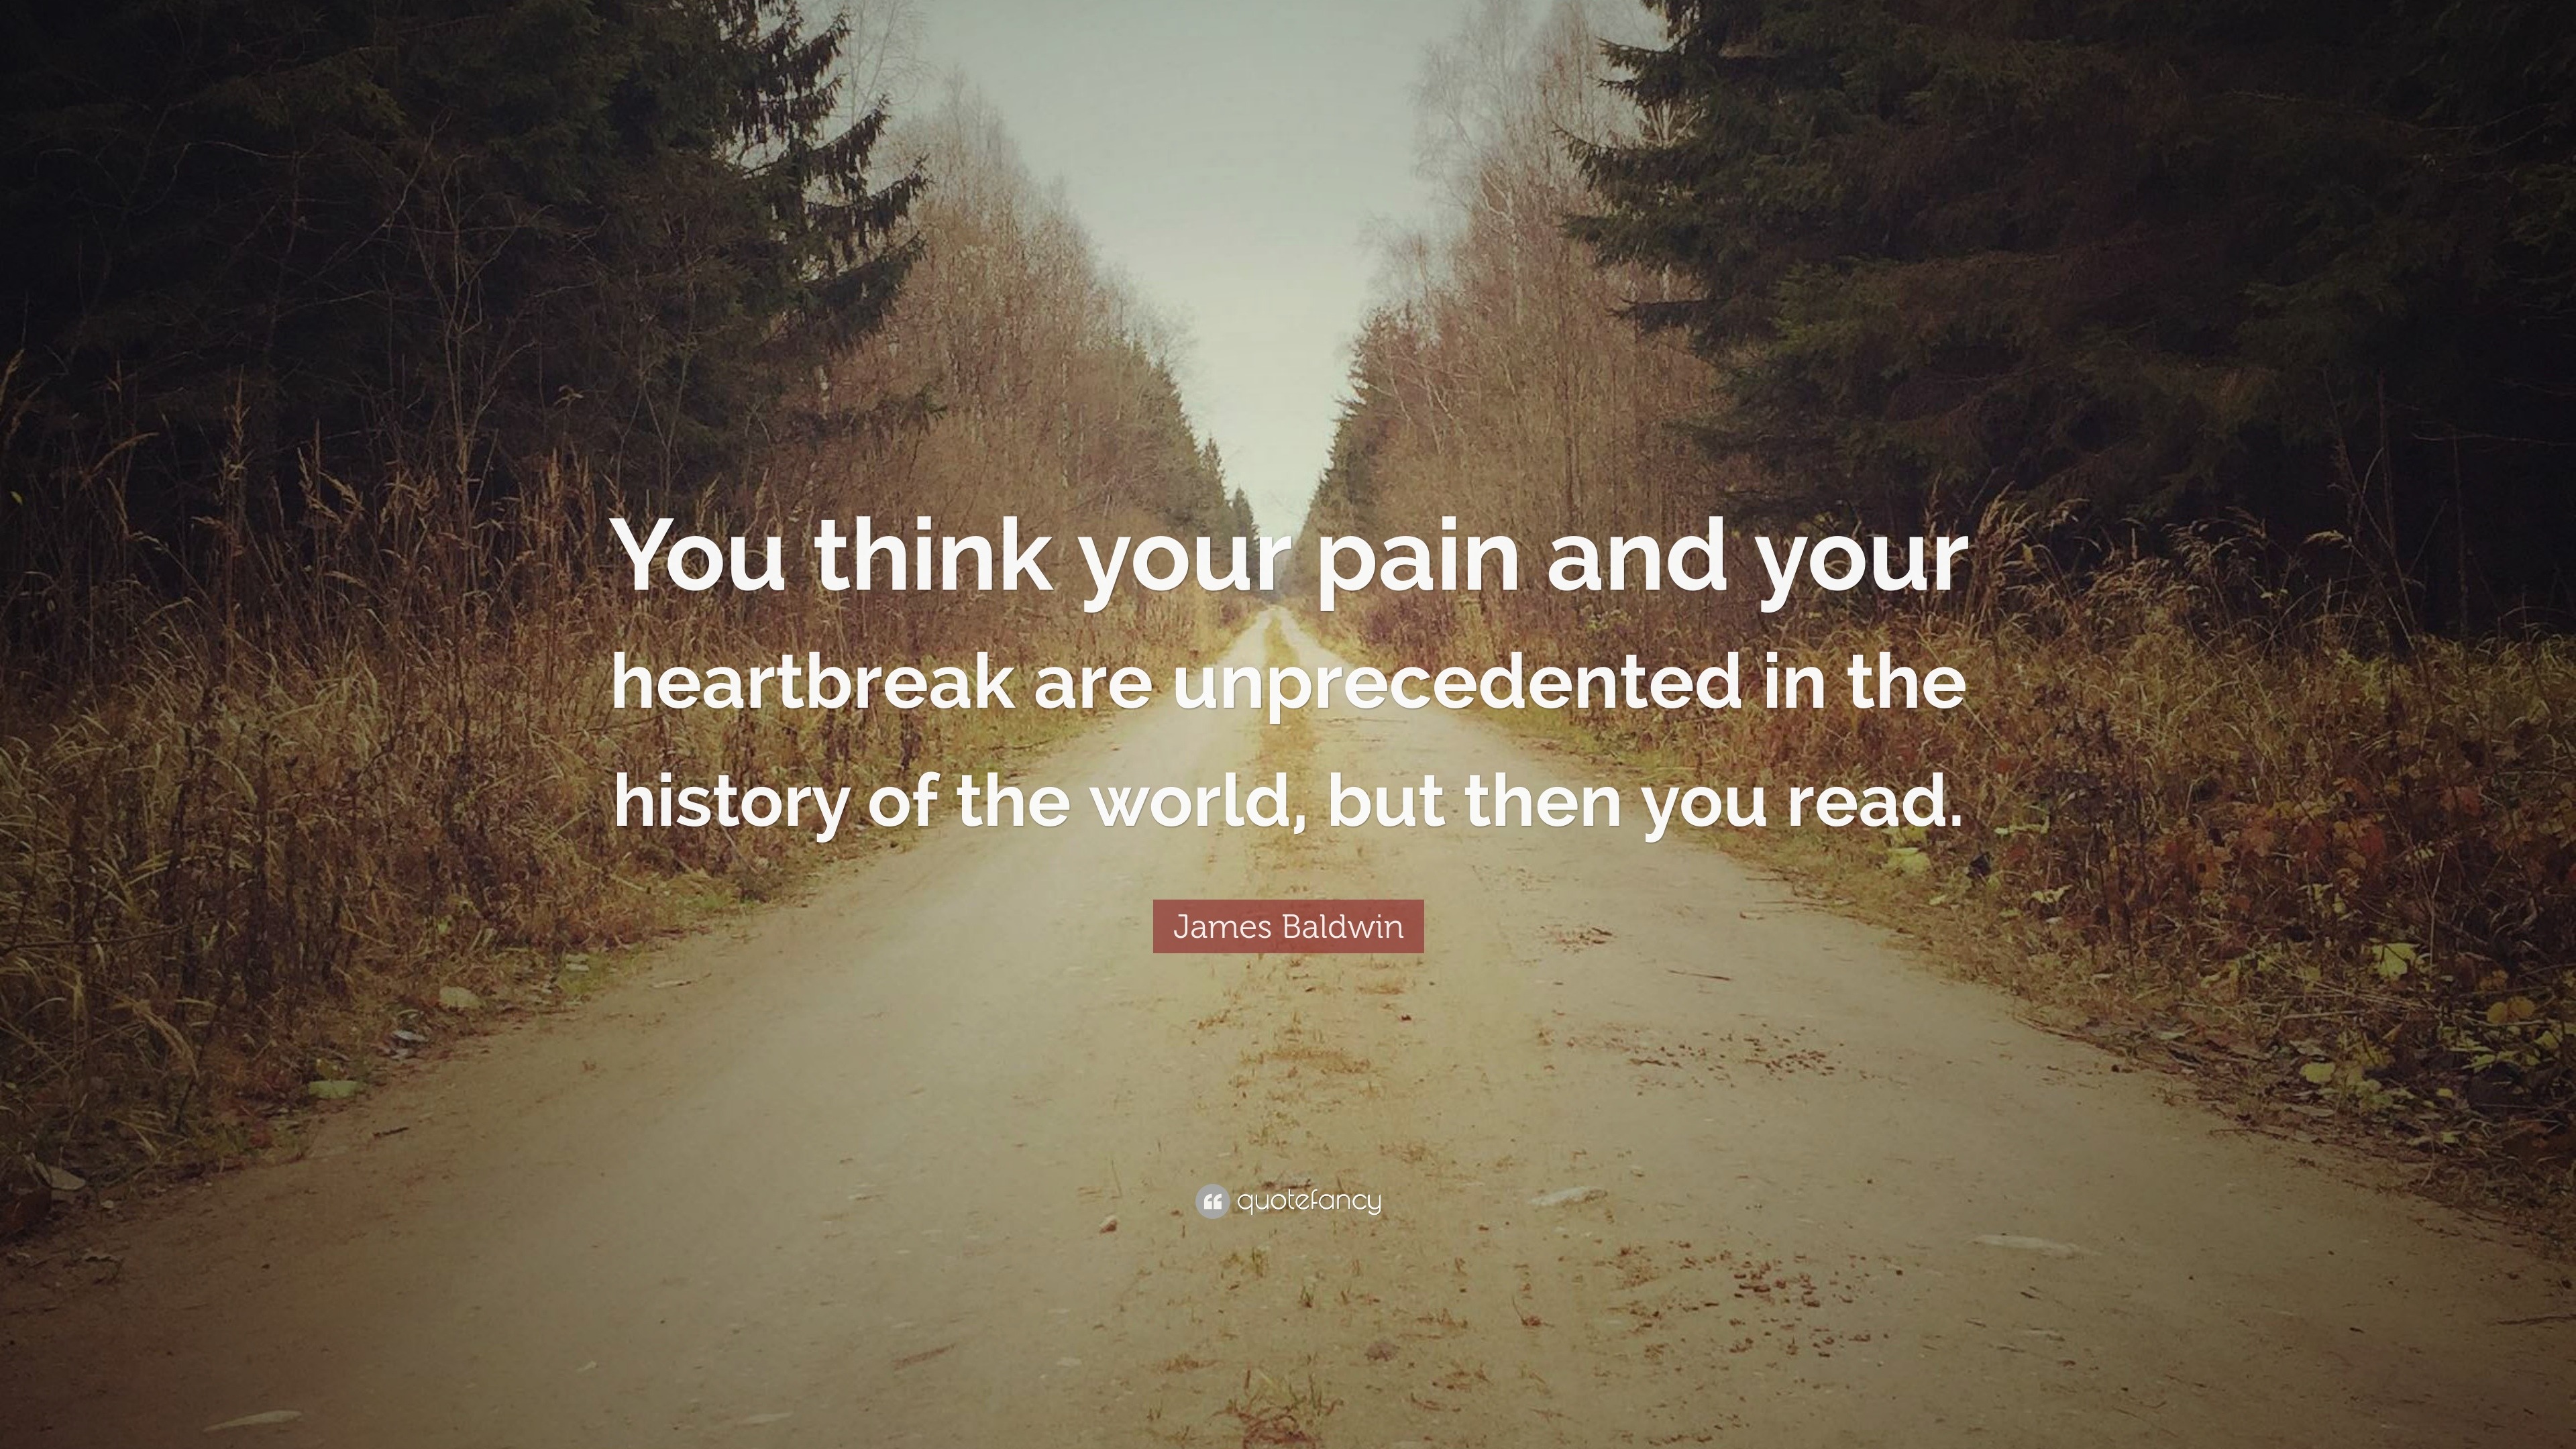 Quotes about heartbreak and pain